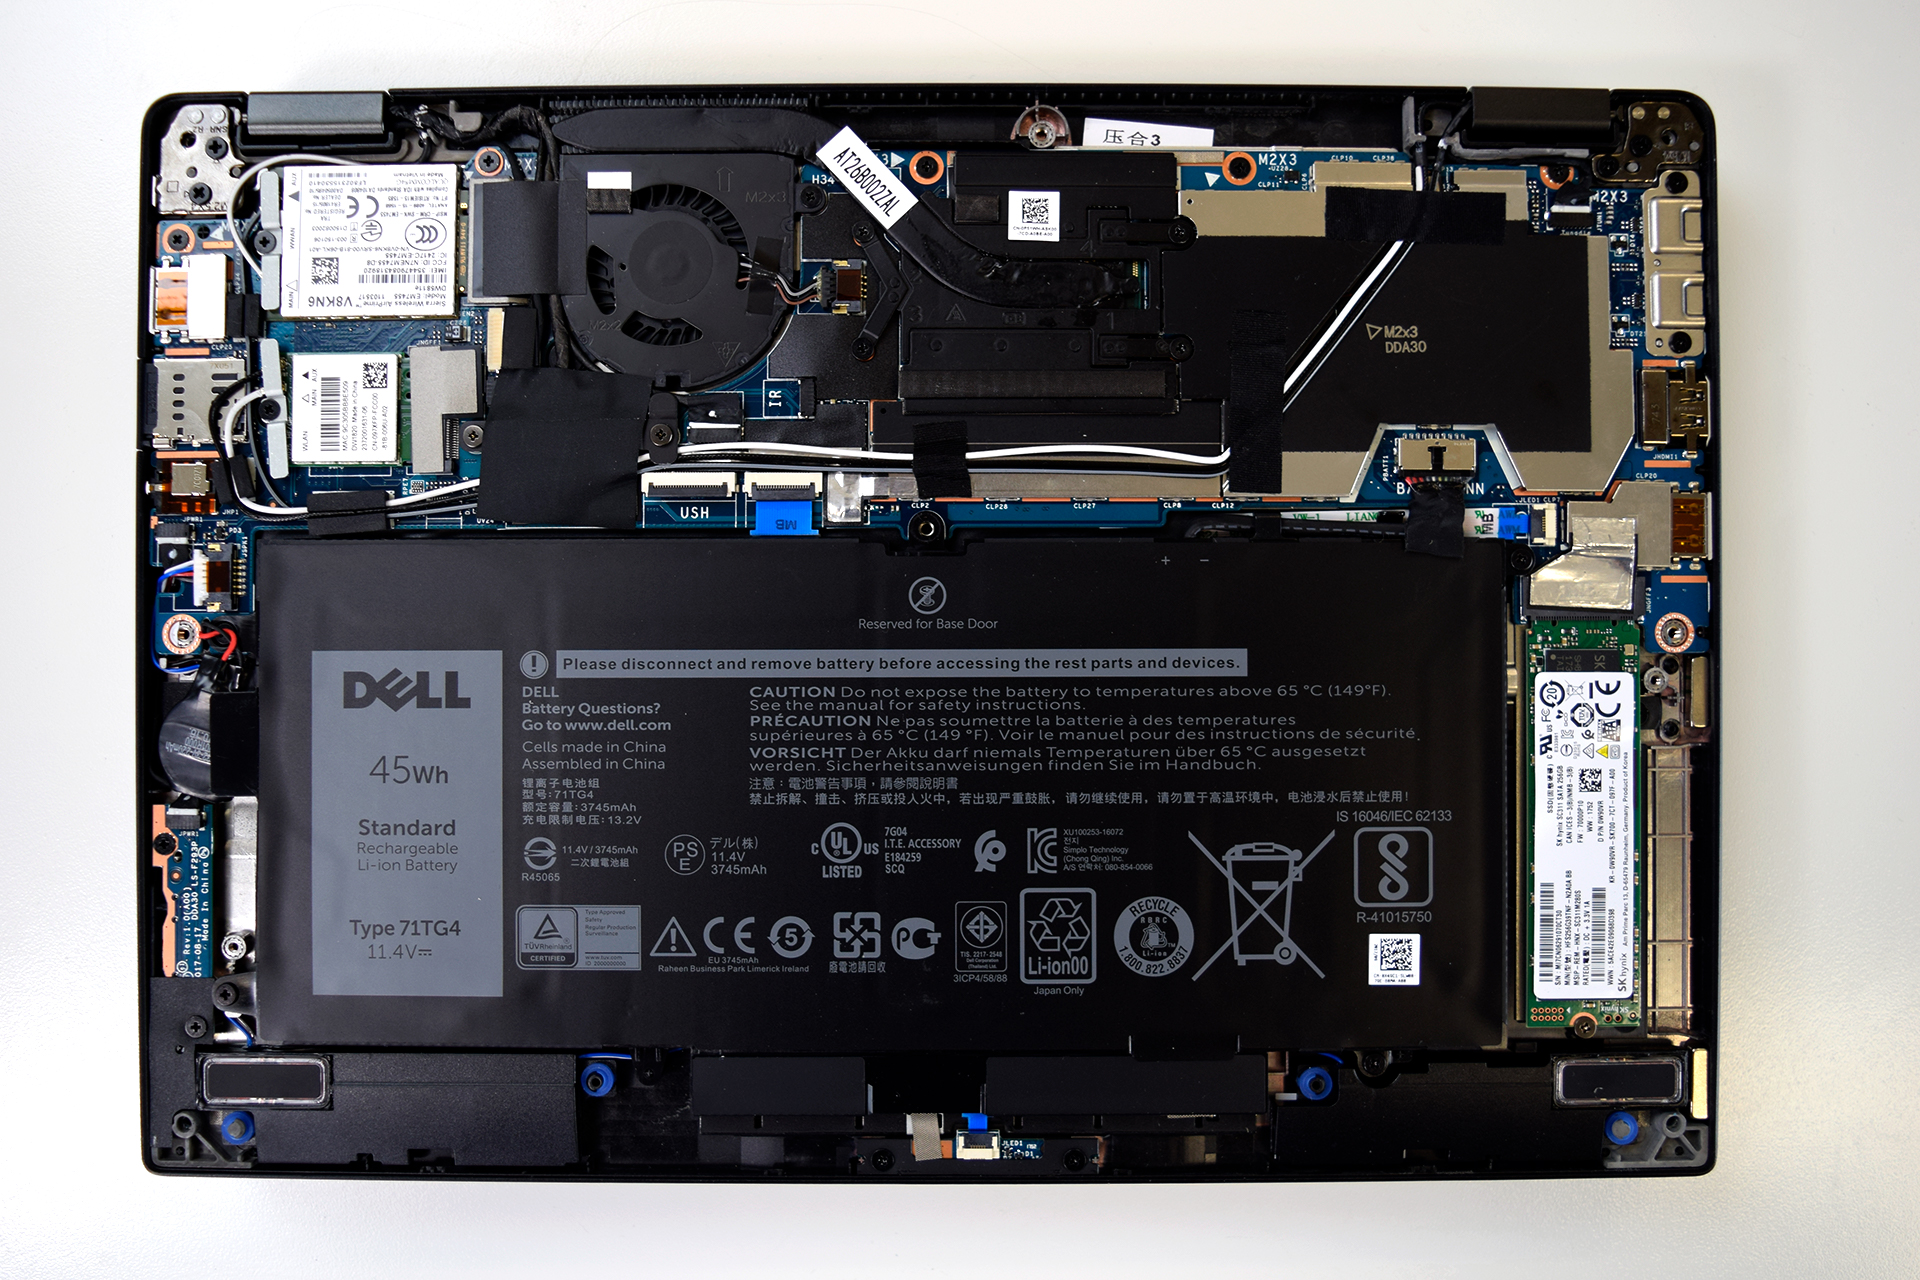 Dell Latitude 7390 2-in-1 review - tiny performance beast with a brilliant  touchscreen display 